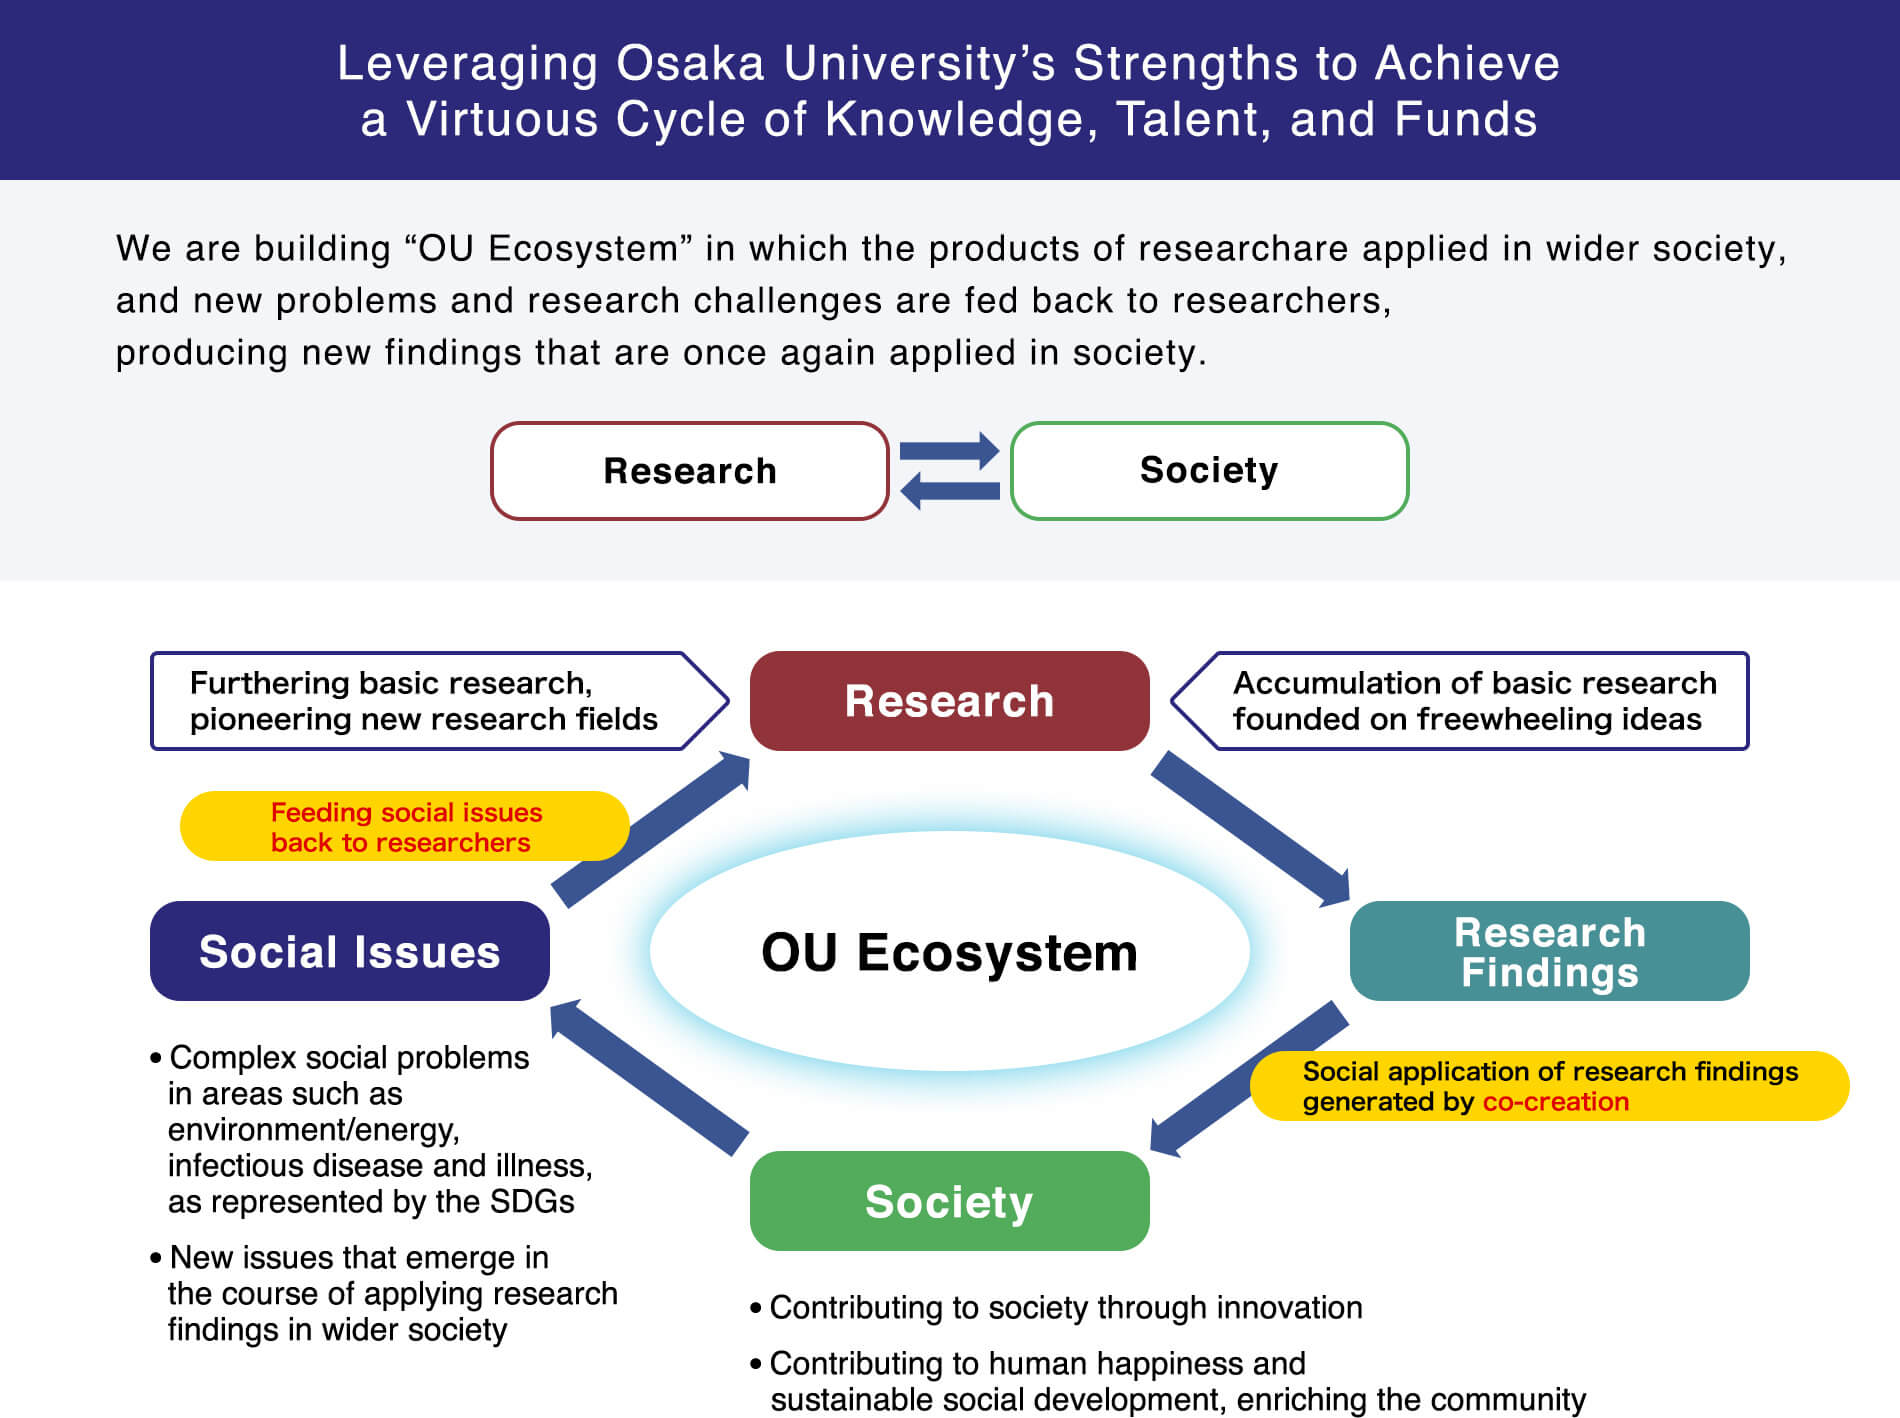 Leveraging Osaka University’s Strengths to Achieve a Virtuous Cycle of Knowledge, Talent, and Funds